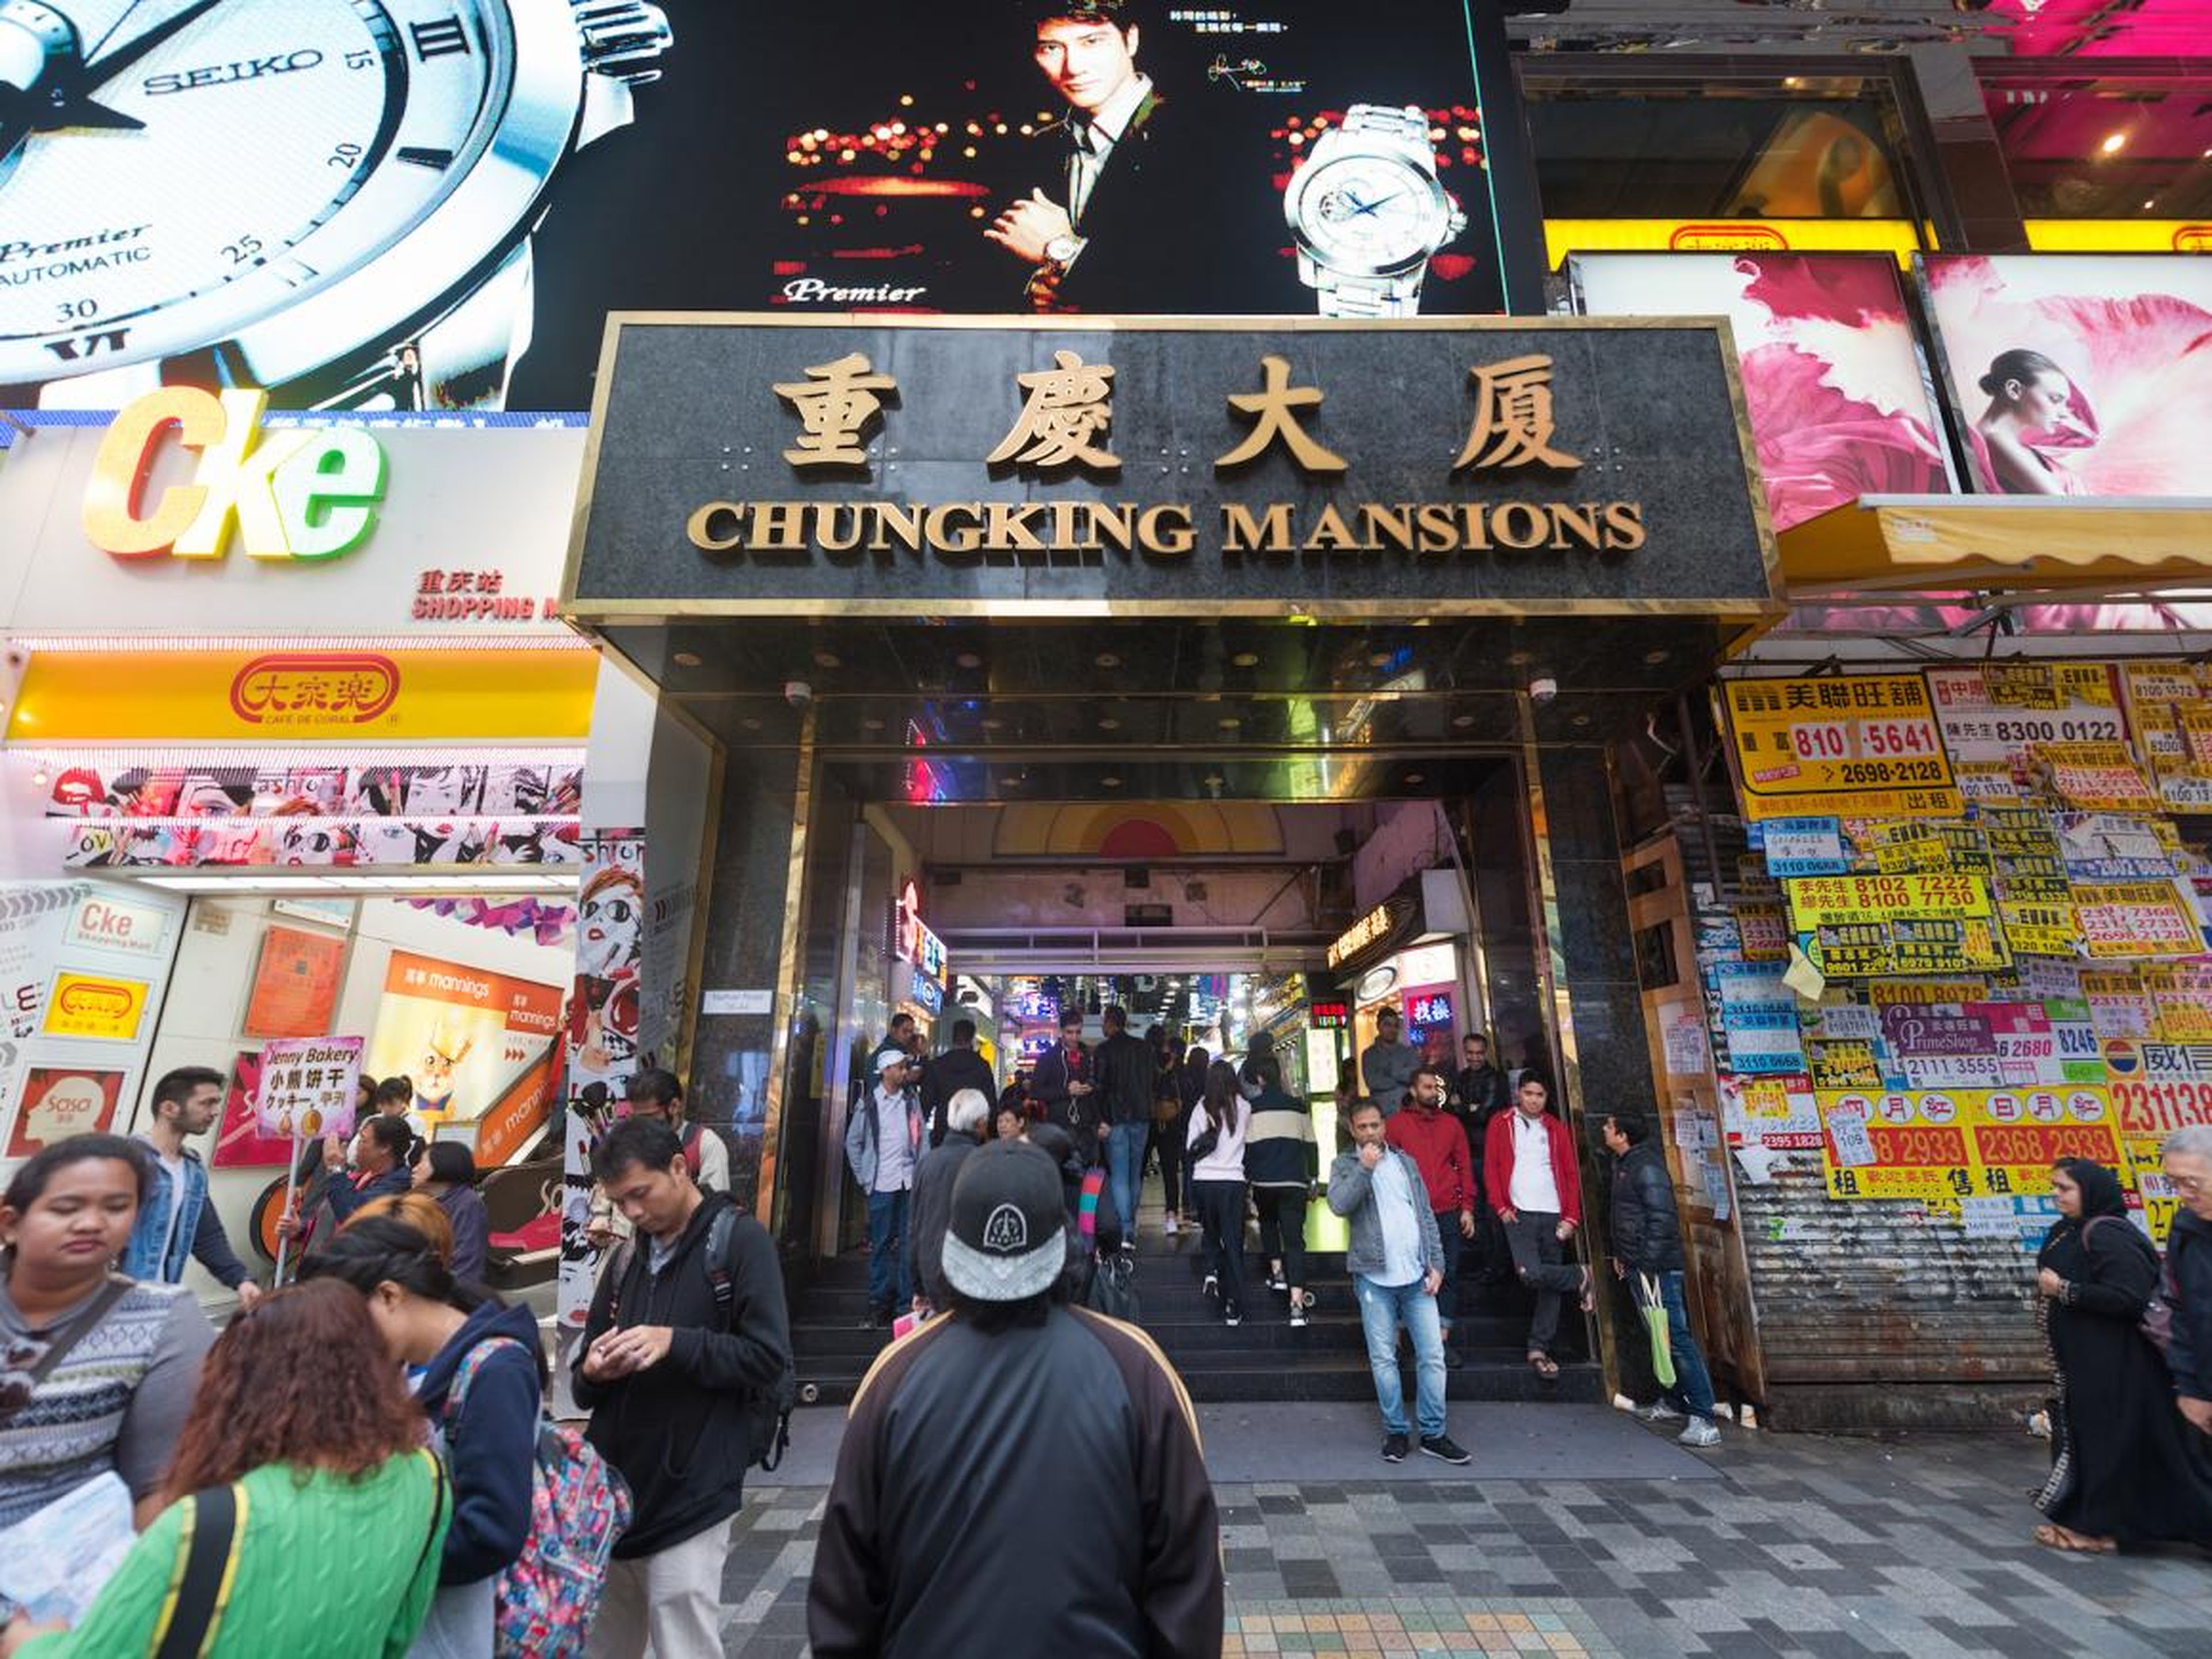 When doing research about Hong Kong, one place that kept coming up as a must-visit was Chungking Mansions. Alternately billed as the cheapest place to find a room in the city and a hotbed of illicit businesses, it is considered